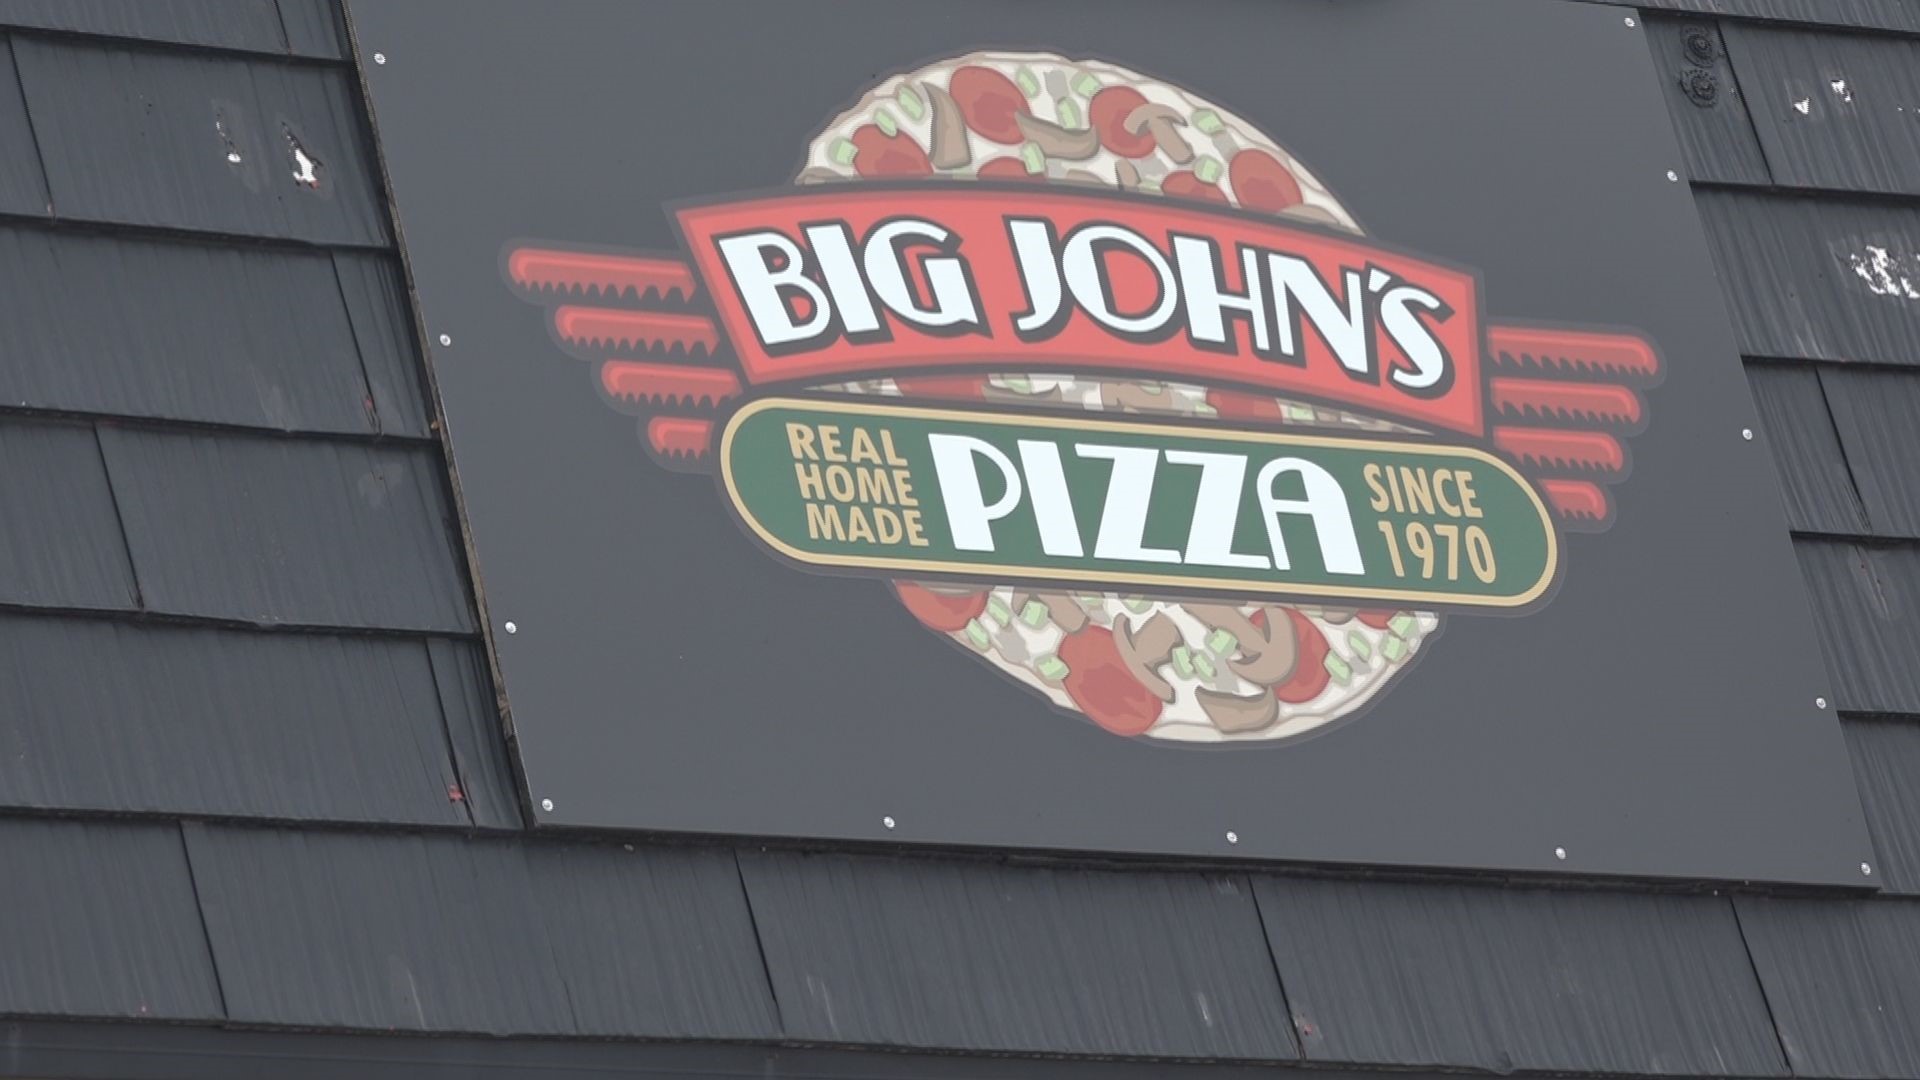 Big John's Pizza in Whitehall posted to Facebook announcing that they're looking for someone to take over the restaurant.